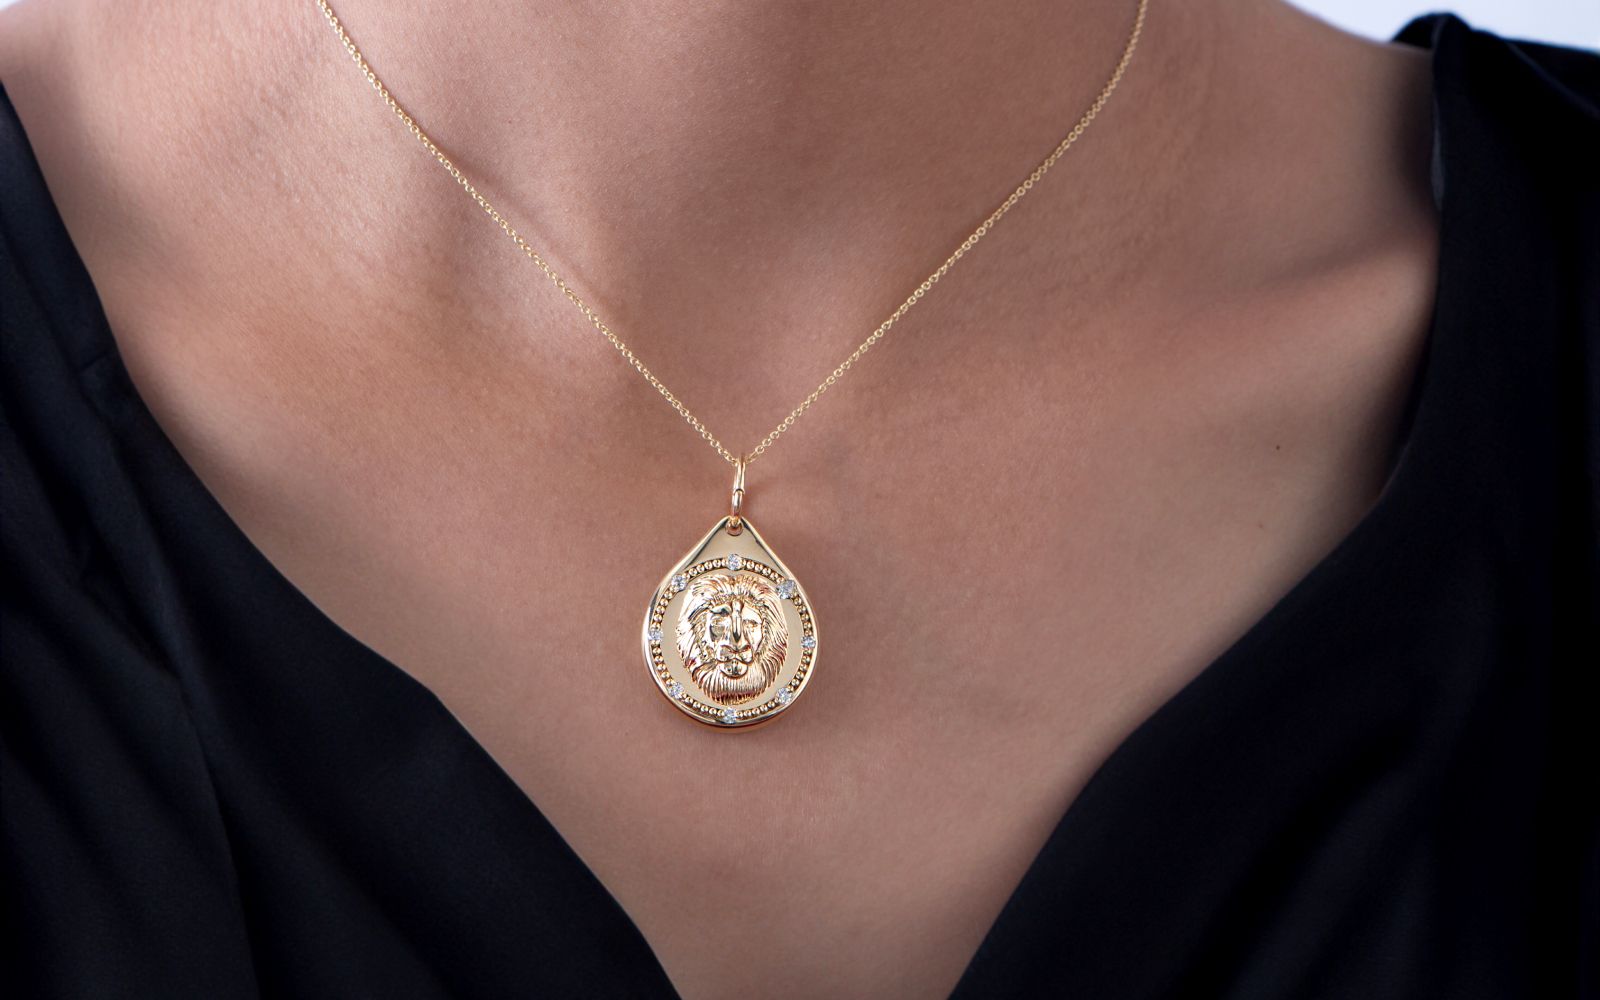 HARAKH Drops of JOY charm in 18k yellow gold and diamonds, worn on a necklace, featuring a lion’s head to bring the wearer courage